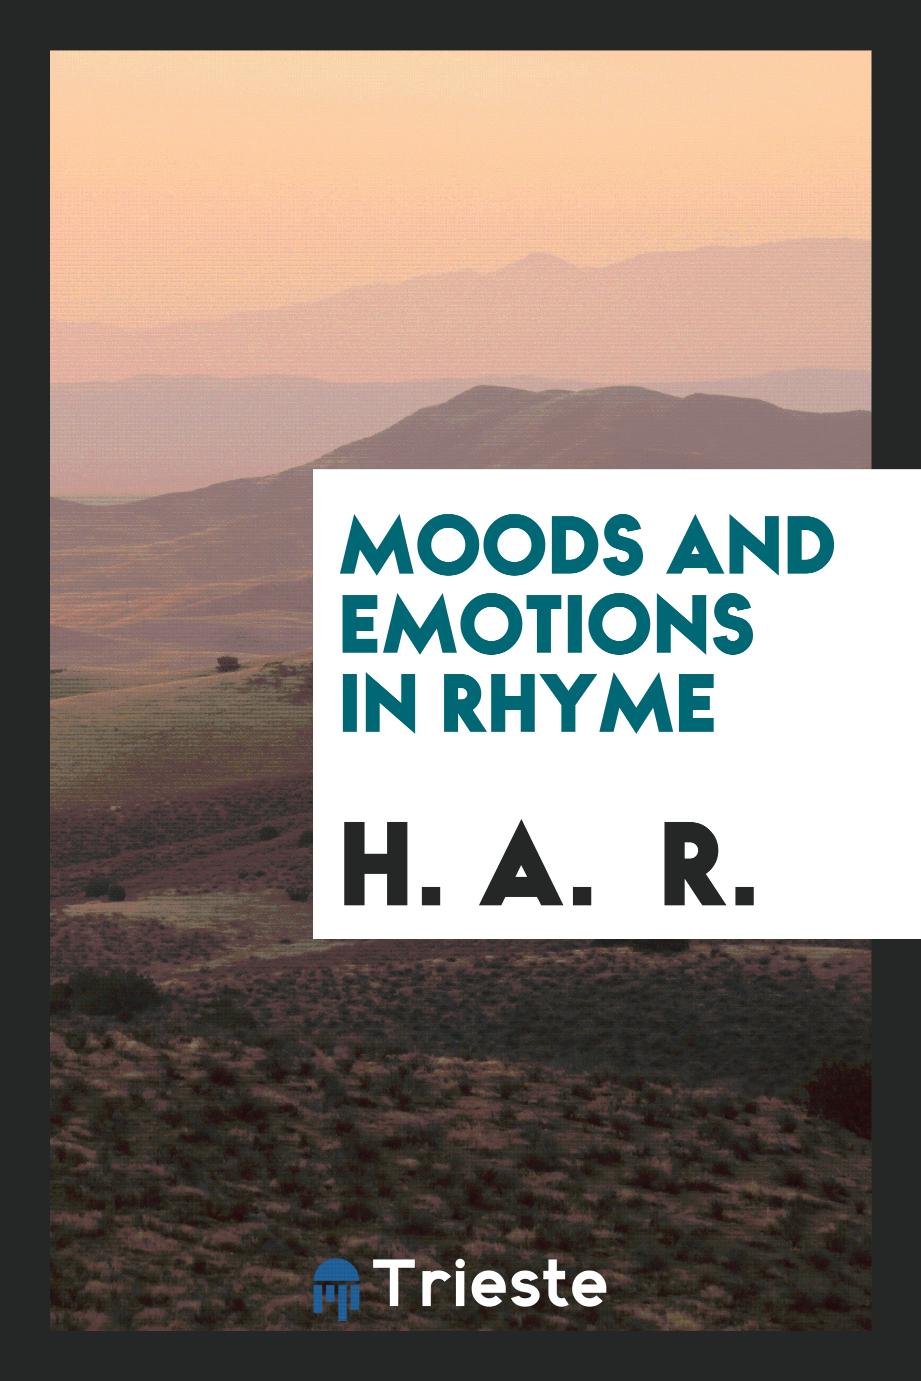 Moods and emotions in rhyme